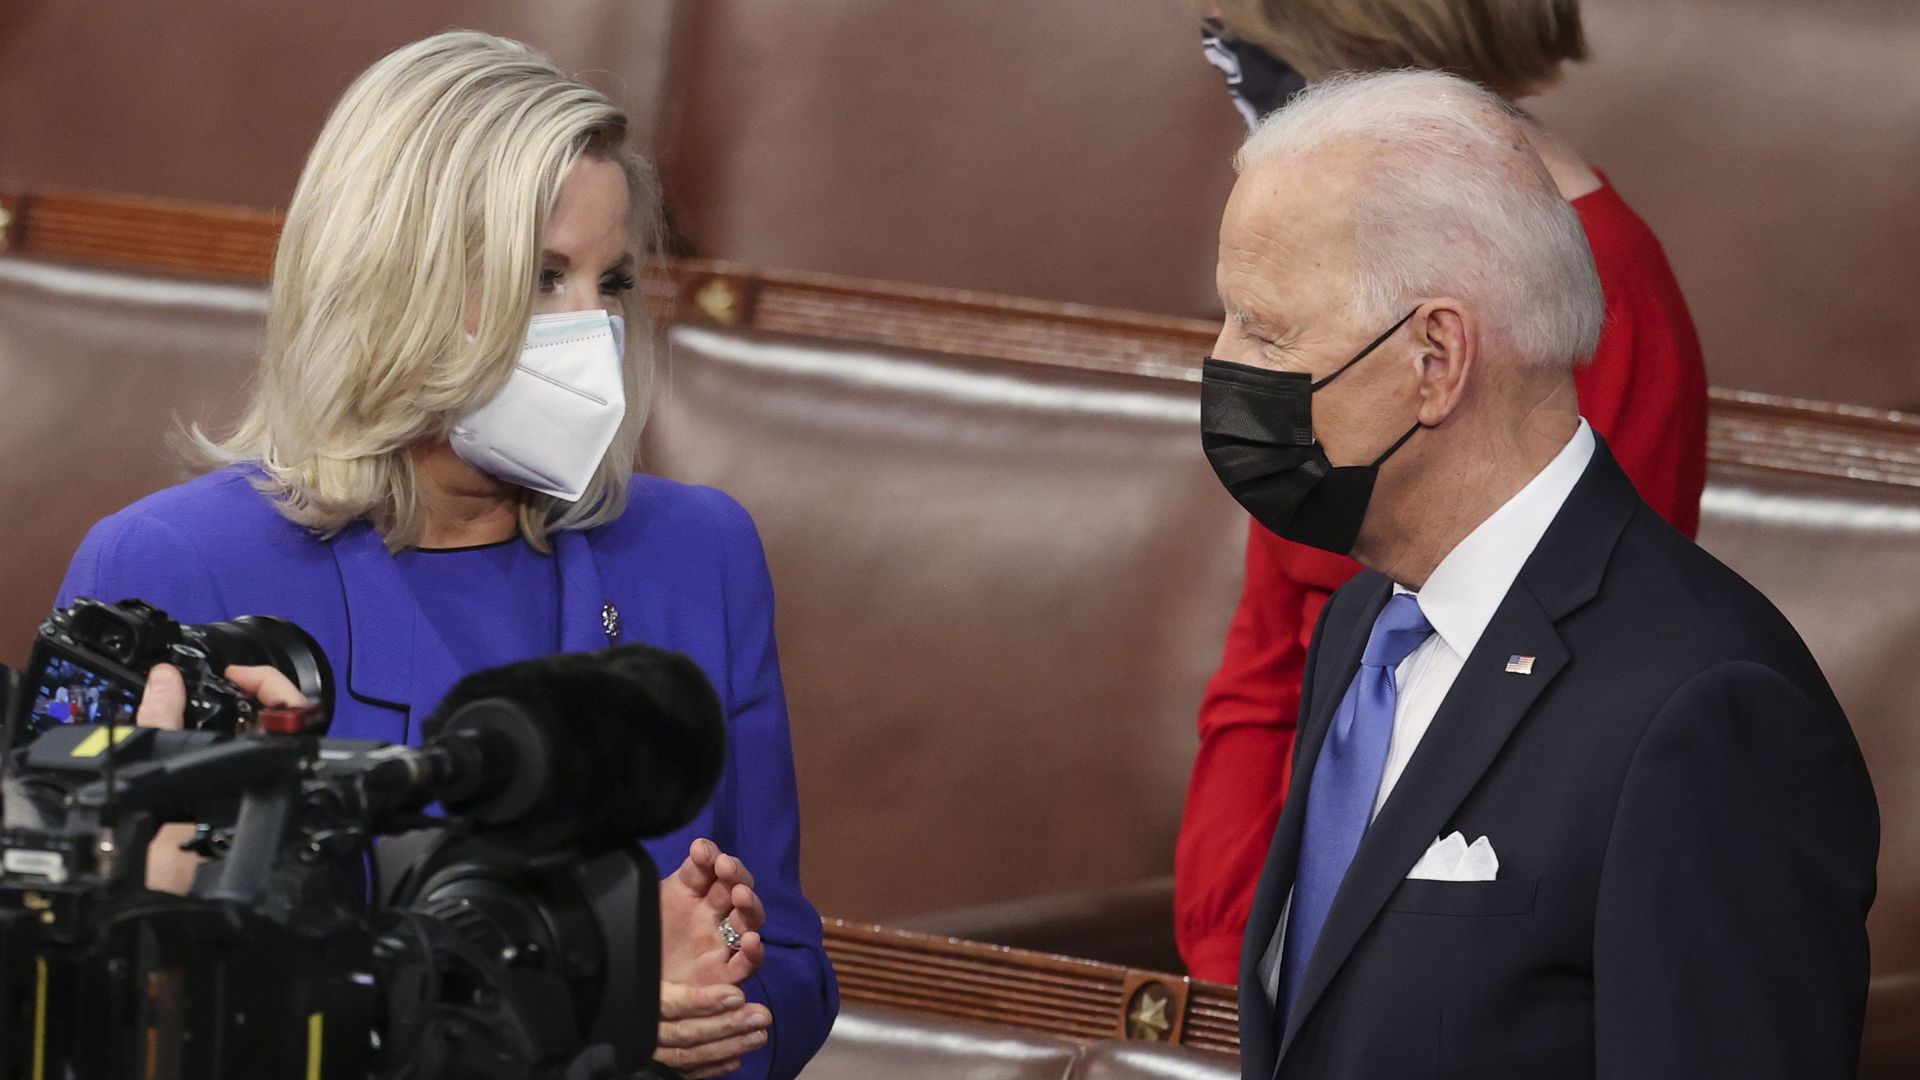 Rep. Liz Cheney speaks to President Biden before his Wednesday speech to a joint session of Congress.